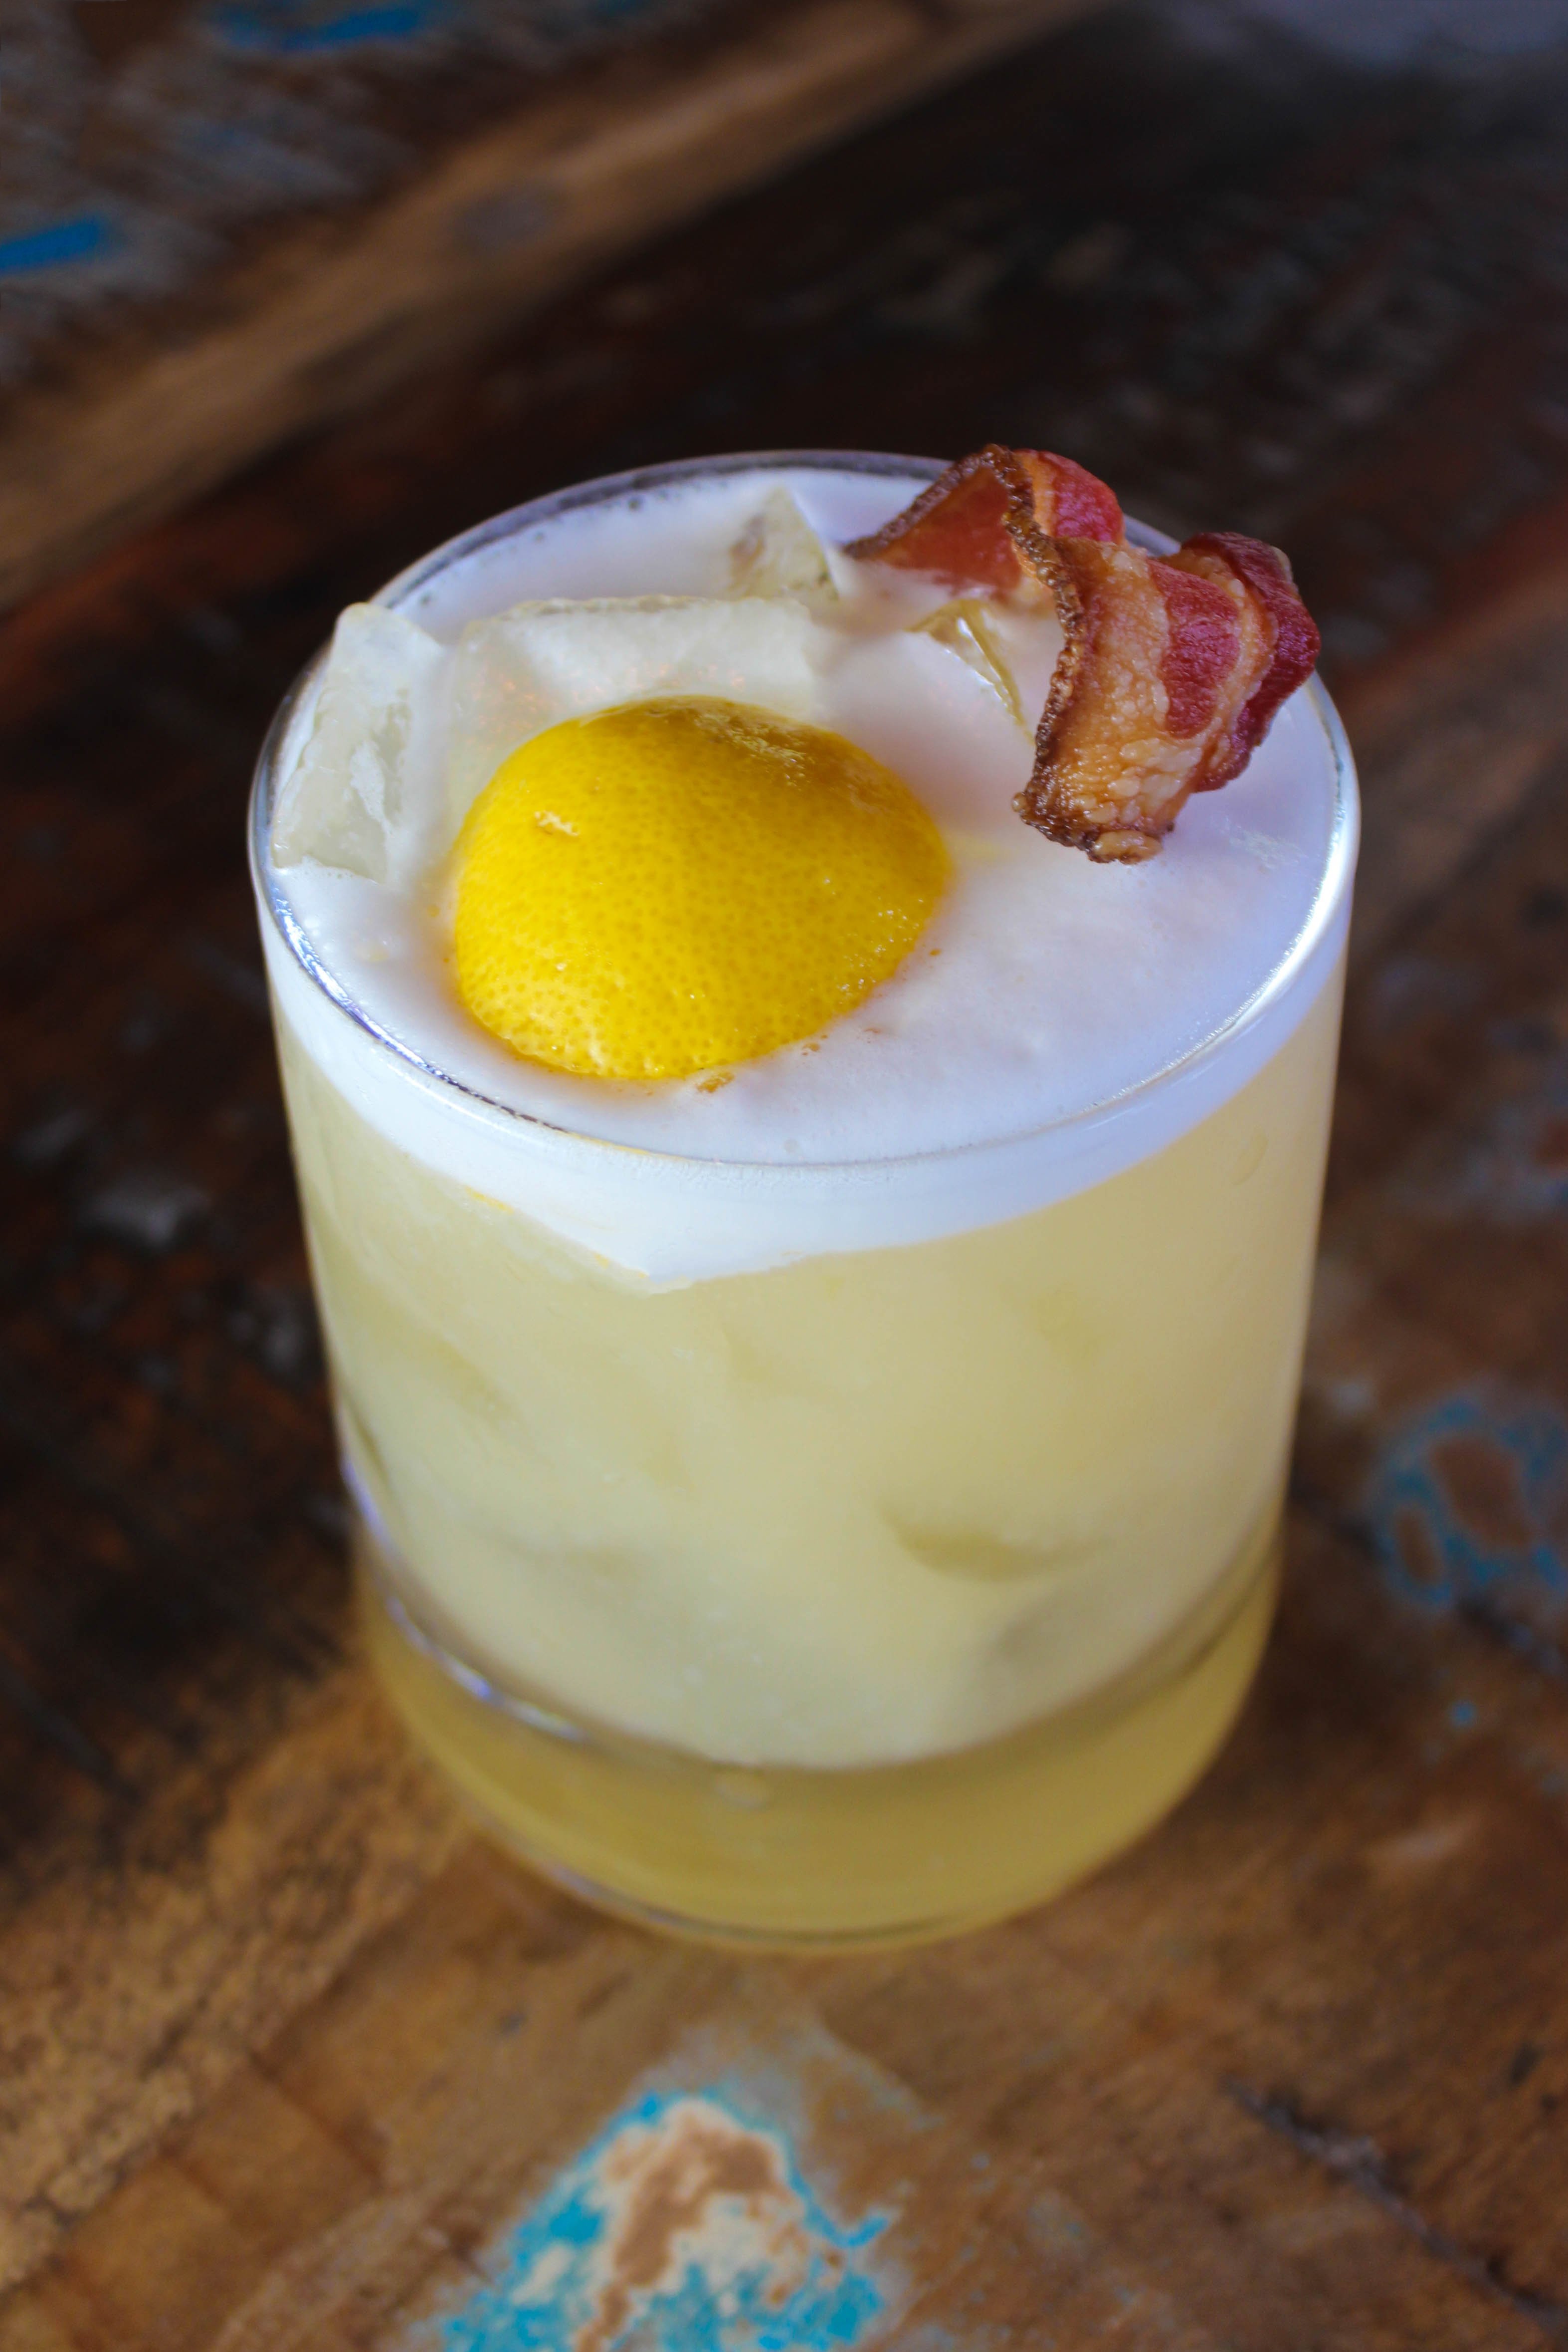 Bacon & Eggs cocktail at Datz